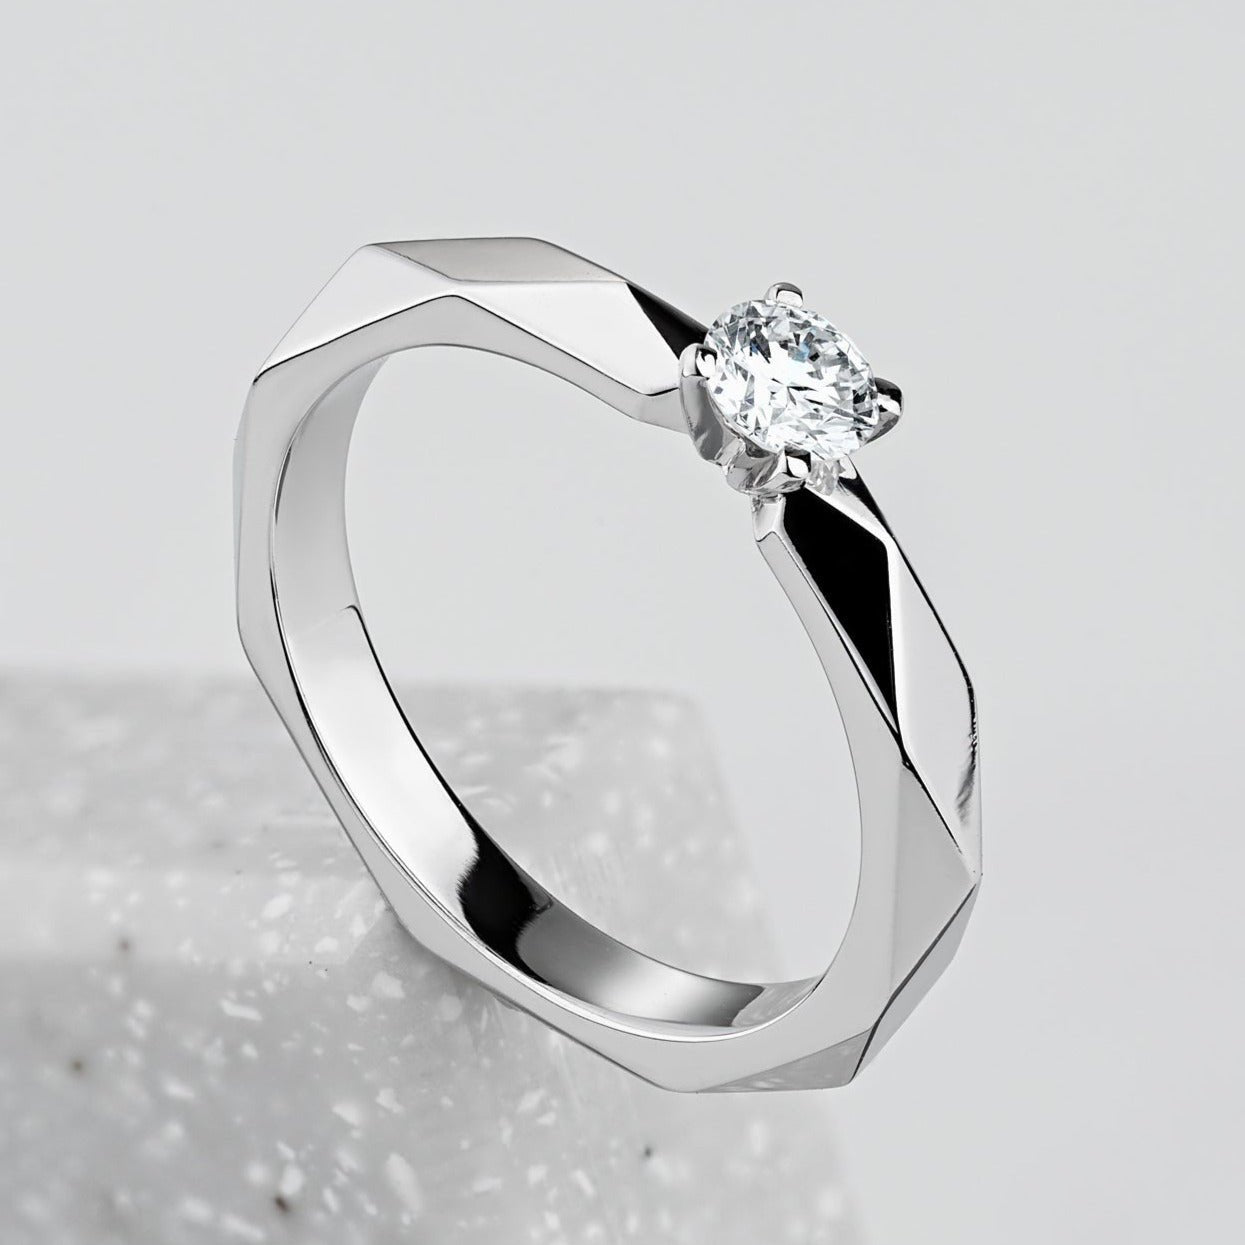 Faceted engagement ring with diamond - escorialjewelry